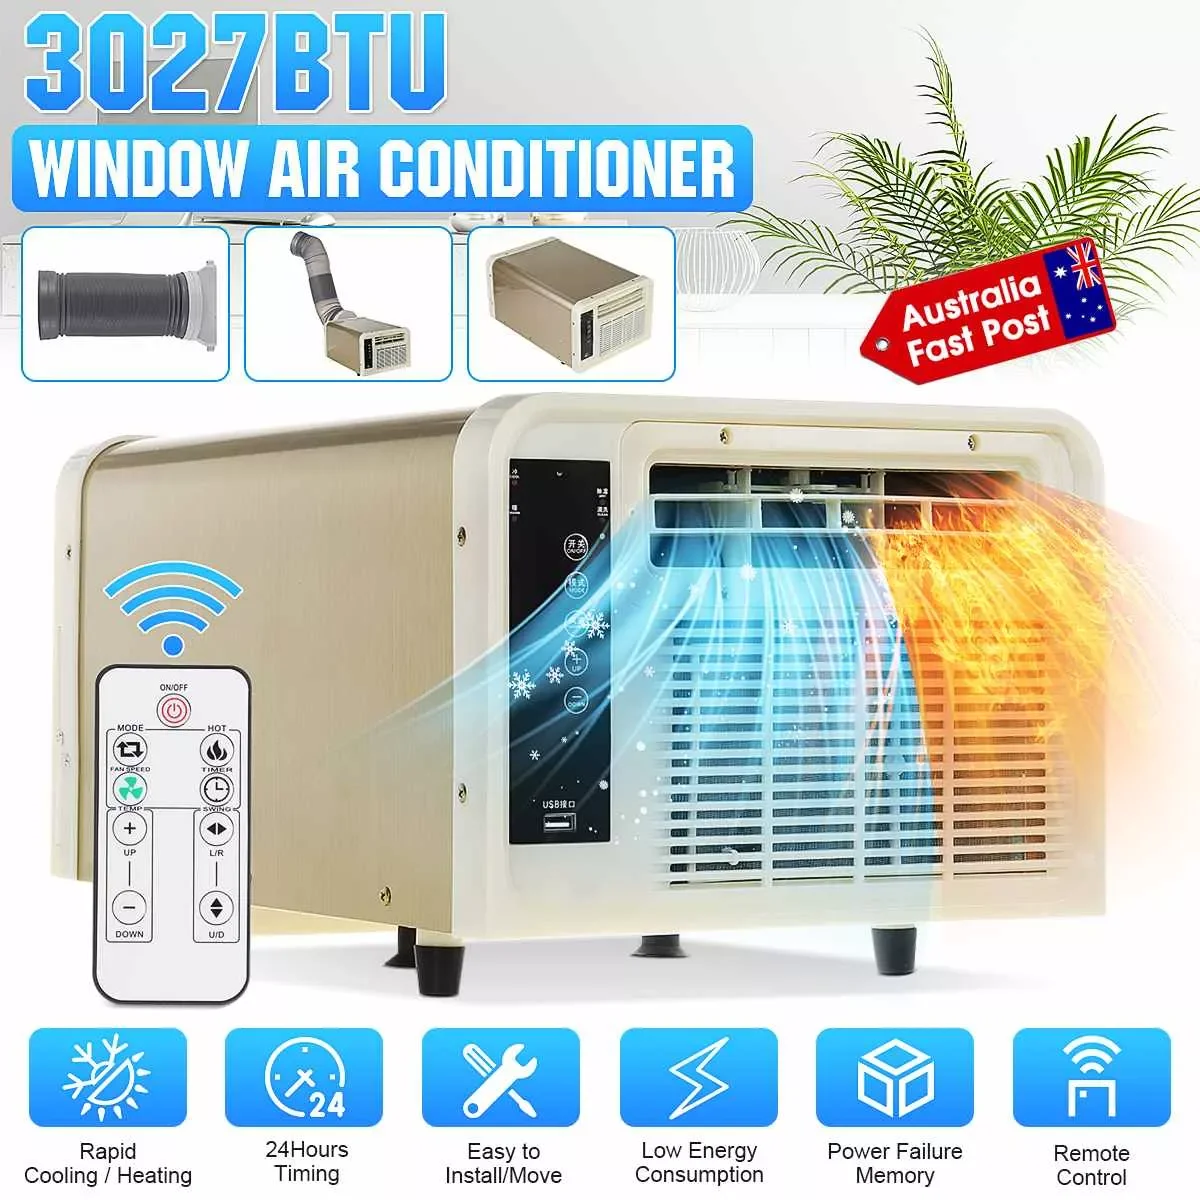 Room Dormitory Portable Air Cooler Remote Control Small Desktop Refrigeration Air Conditioning Fan Panel Home Heater 220V enlarge